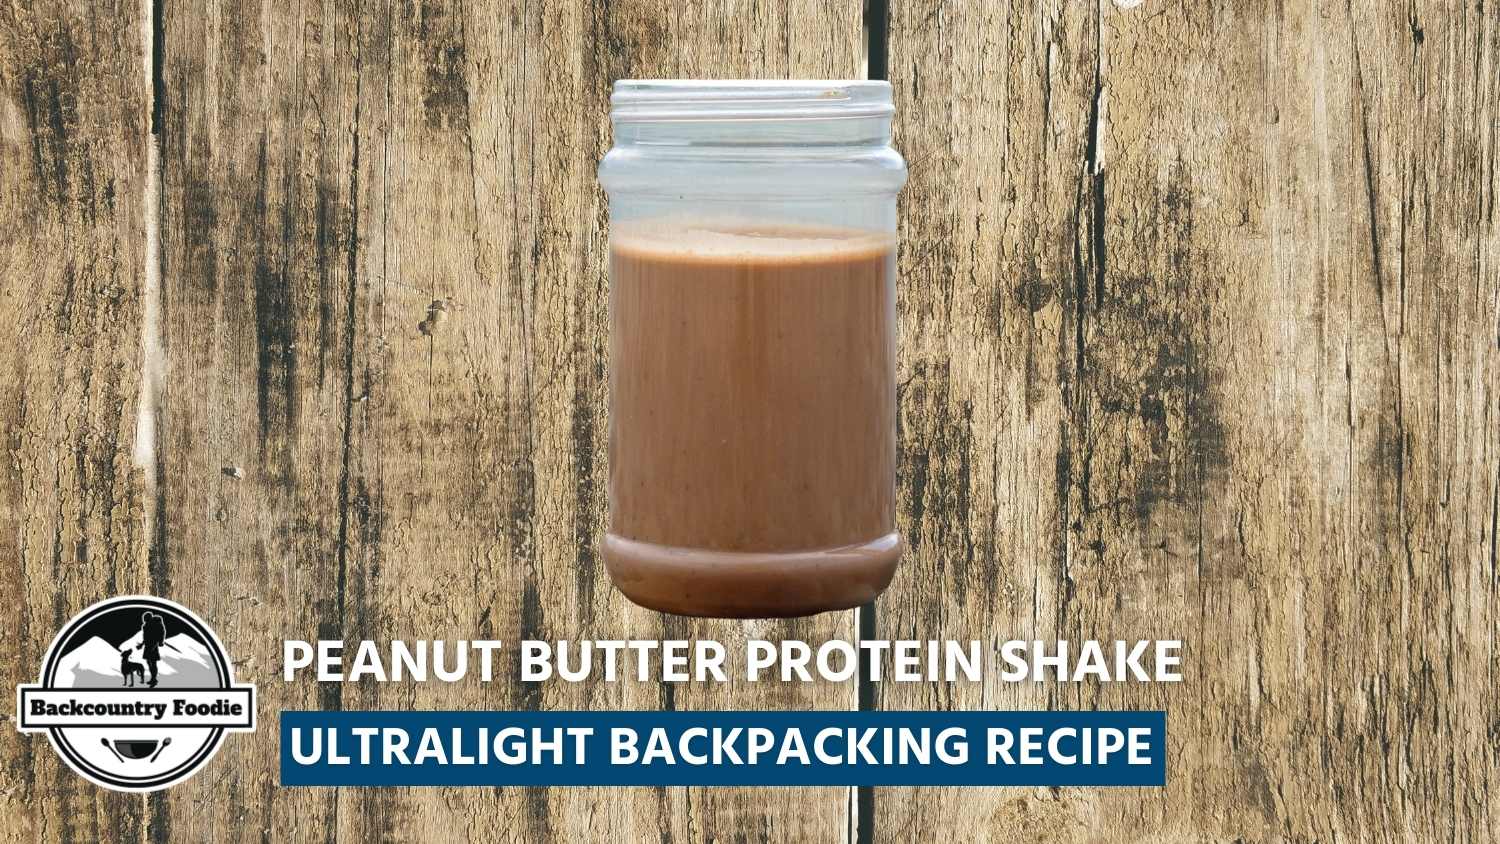 Backcountry Foodie Blog Peanut Butter Protein Shake Ultralight Backpacking Recipe